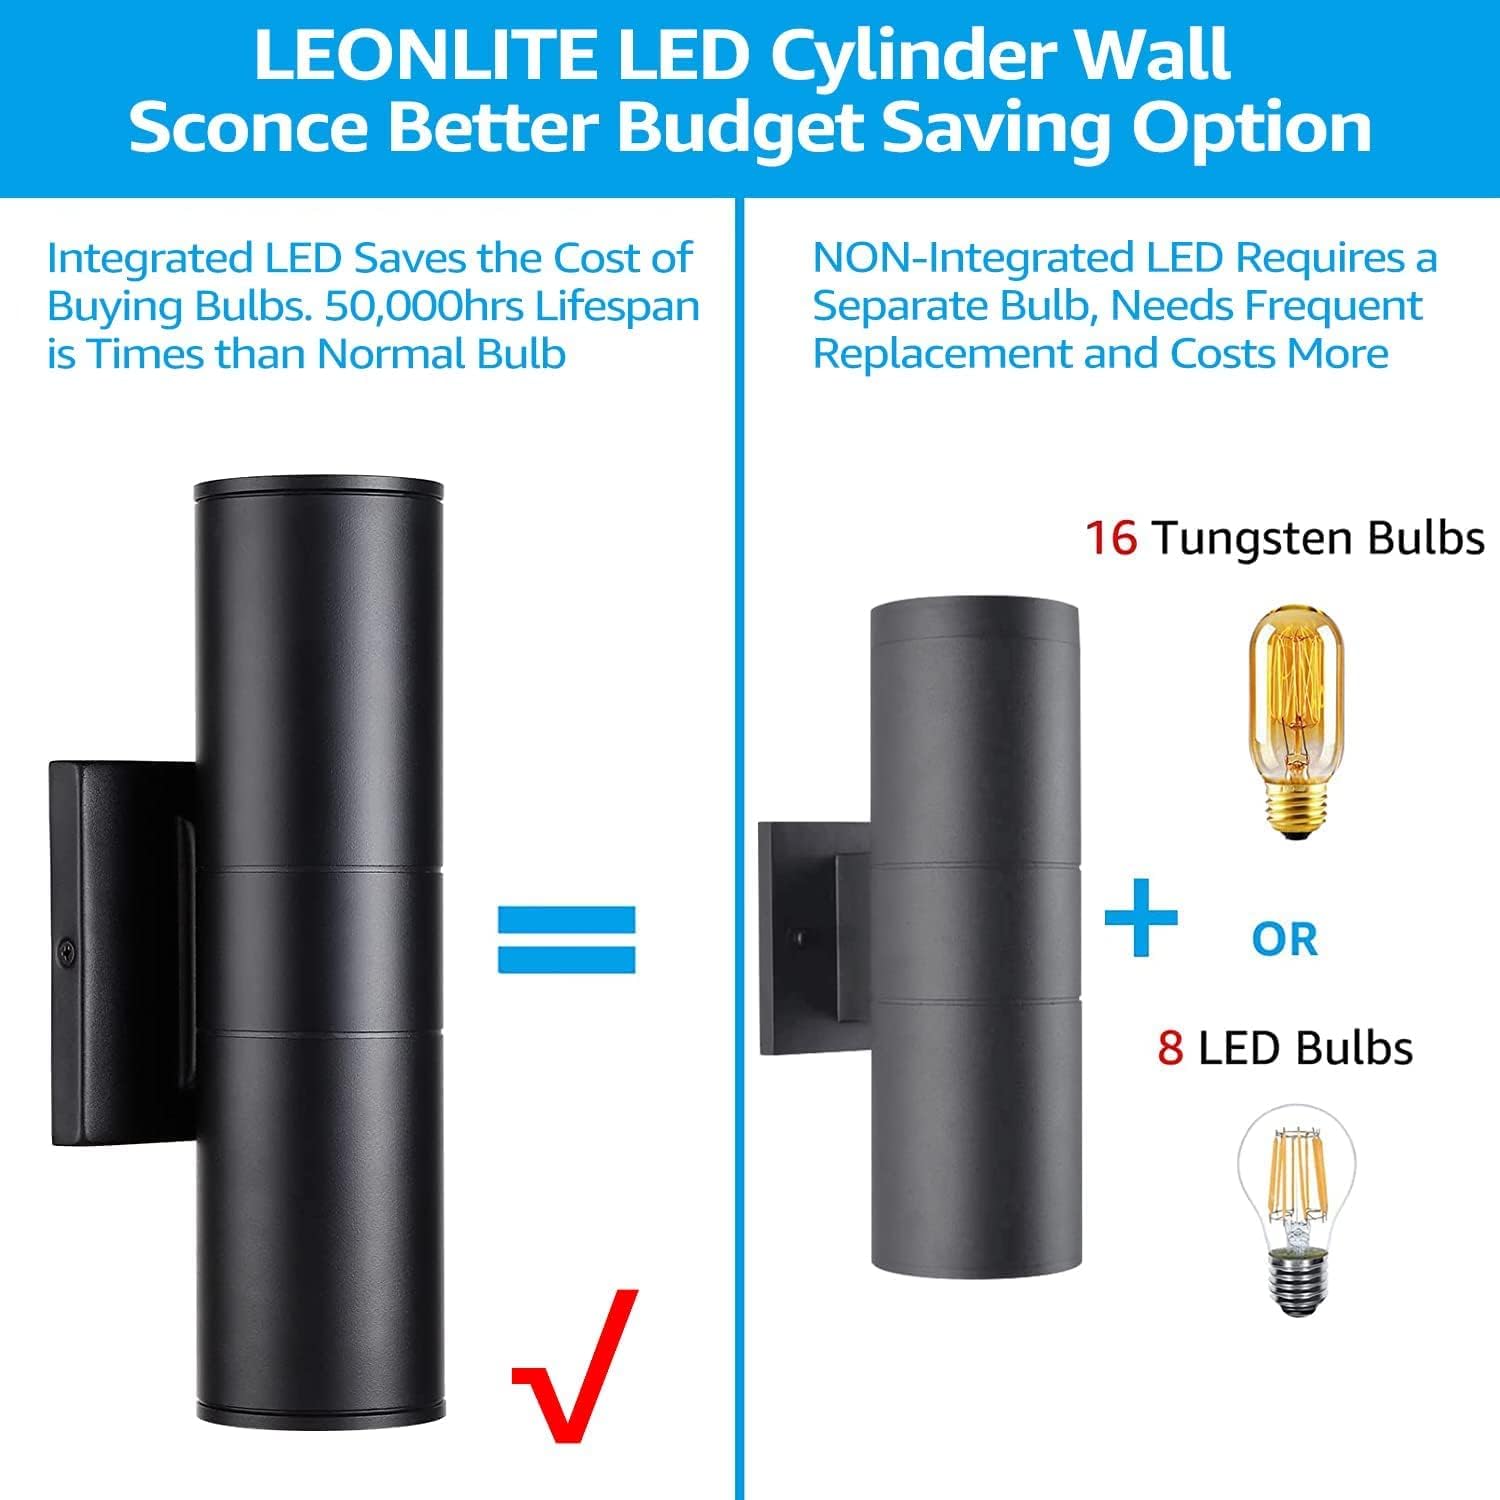 Integrated LED Cylinder Up Down Wall Light Outdoor, 100V-277V Aluminum Waterproof High-end Wall Sconce in 2 Lights, ETL-Listed 20W 1400lm, Exterior Front Door Porch Light Fixtures, Pack of 2